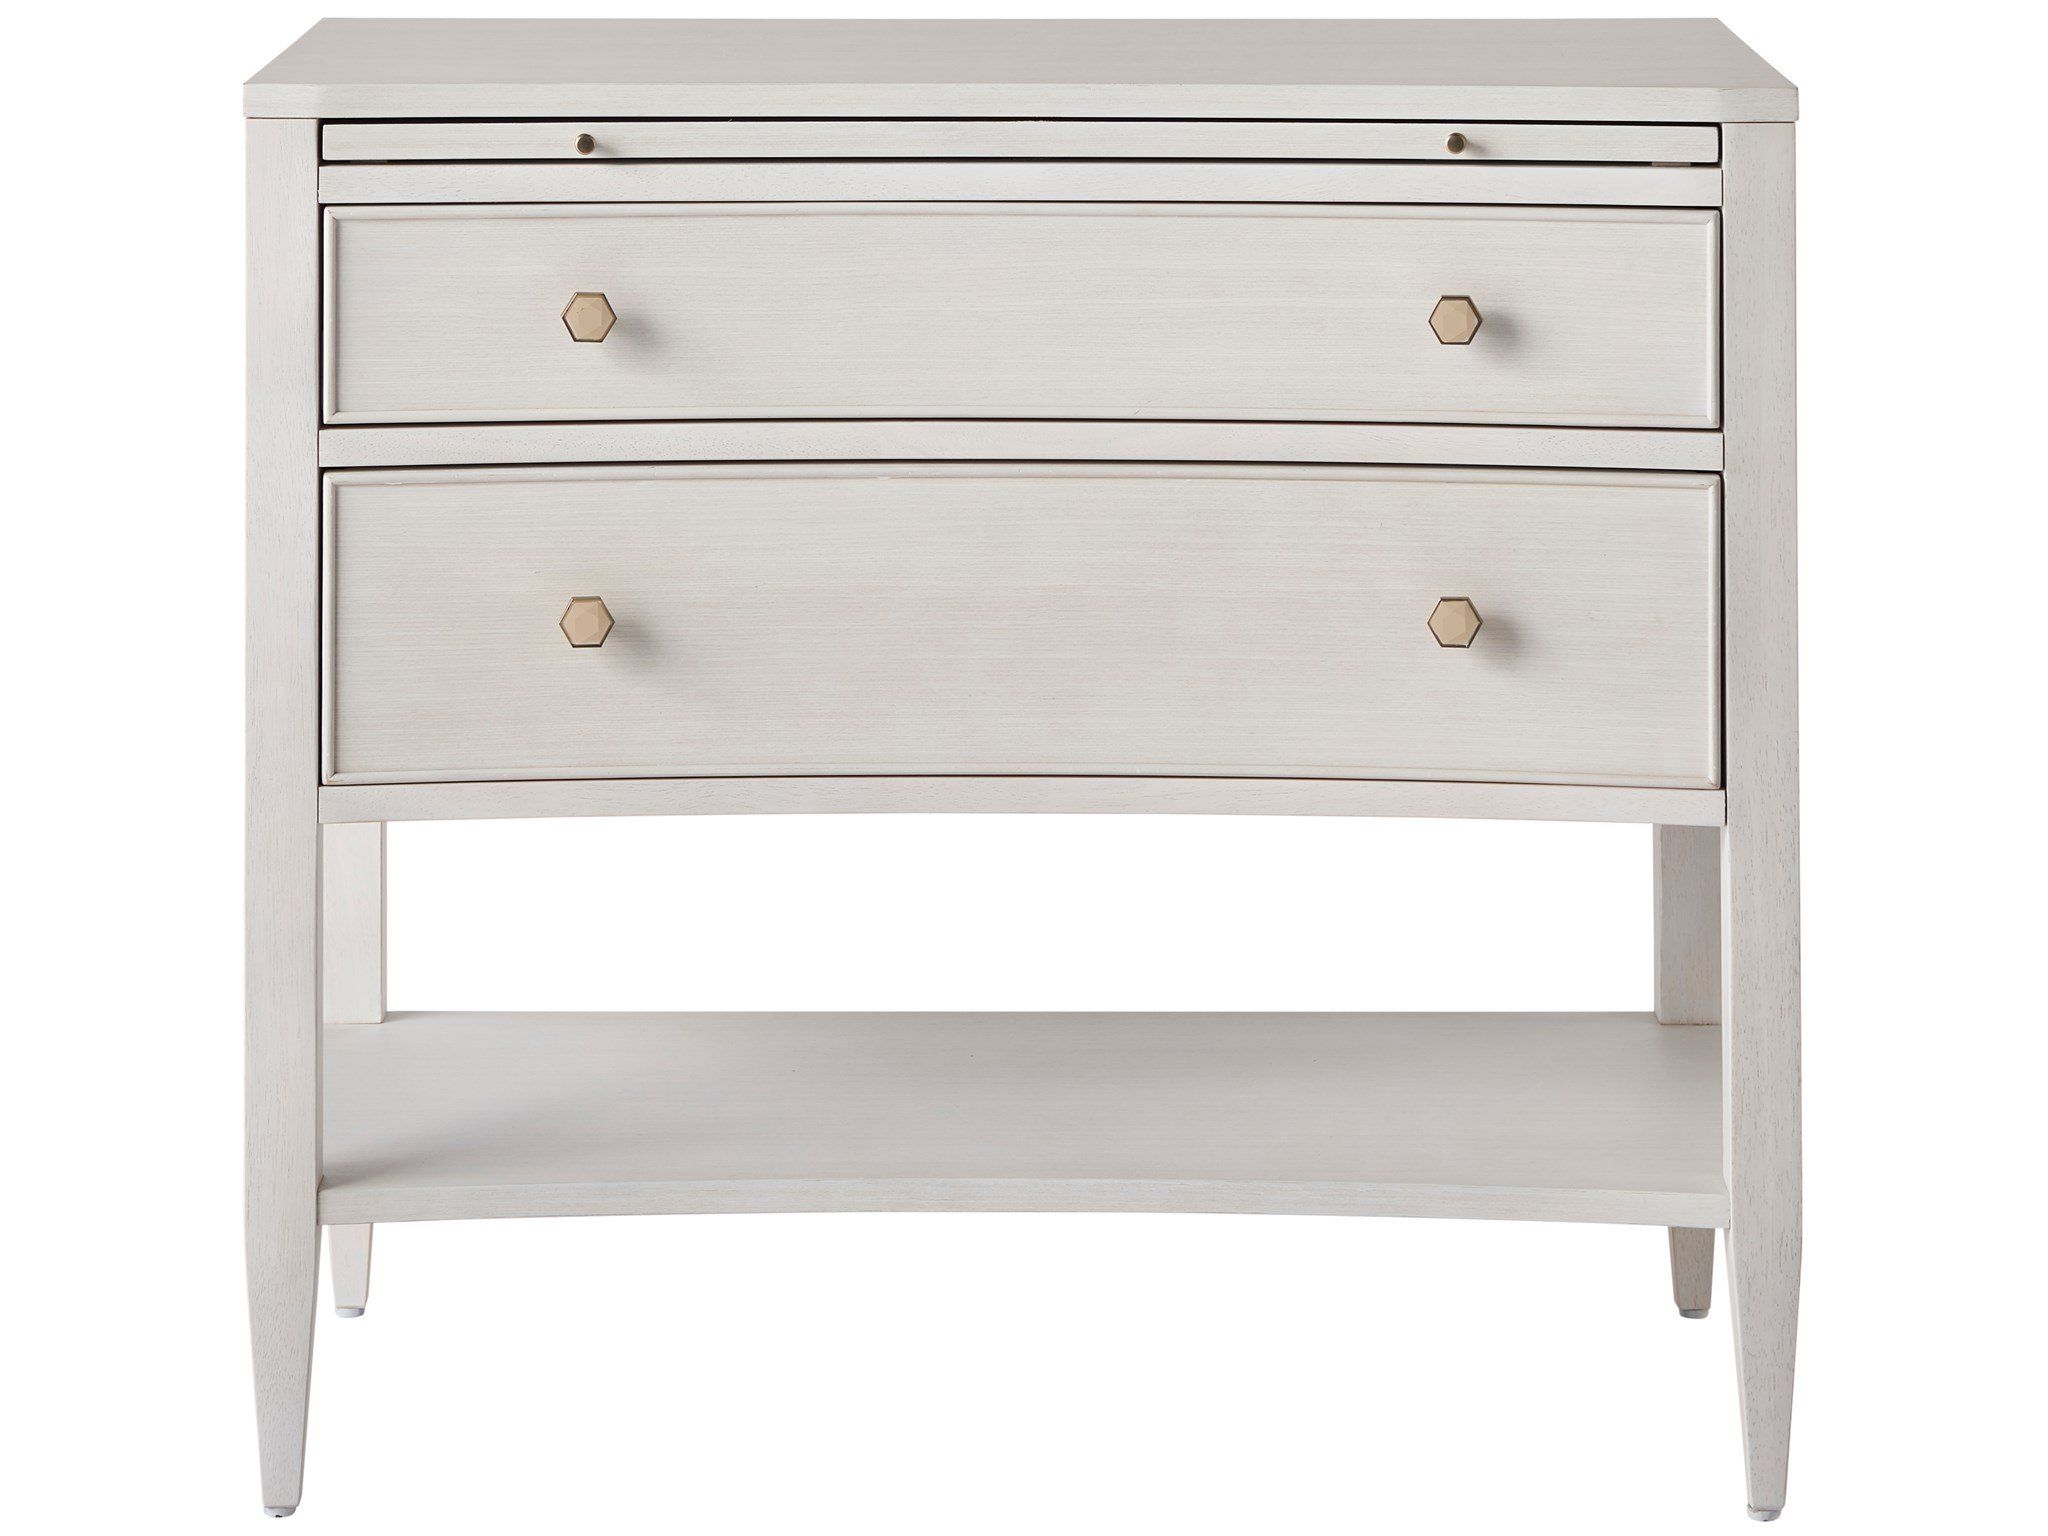 Miranda Kerr Home Chelsea Nightstand | Savvy Furniture Throughout Rey Coastal Chic Universal Console 2 Drawer Tv Stands (View 6 of 20)